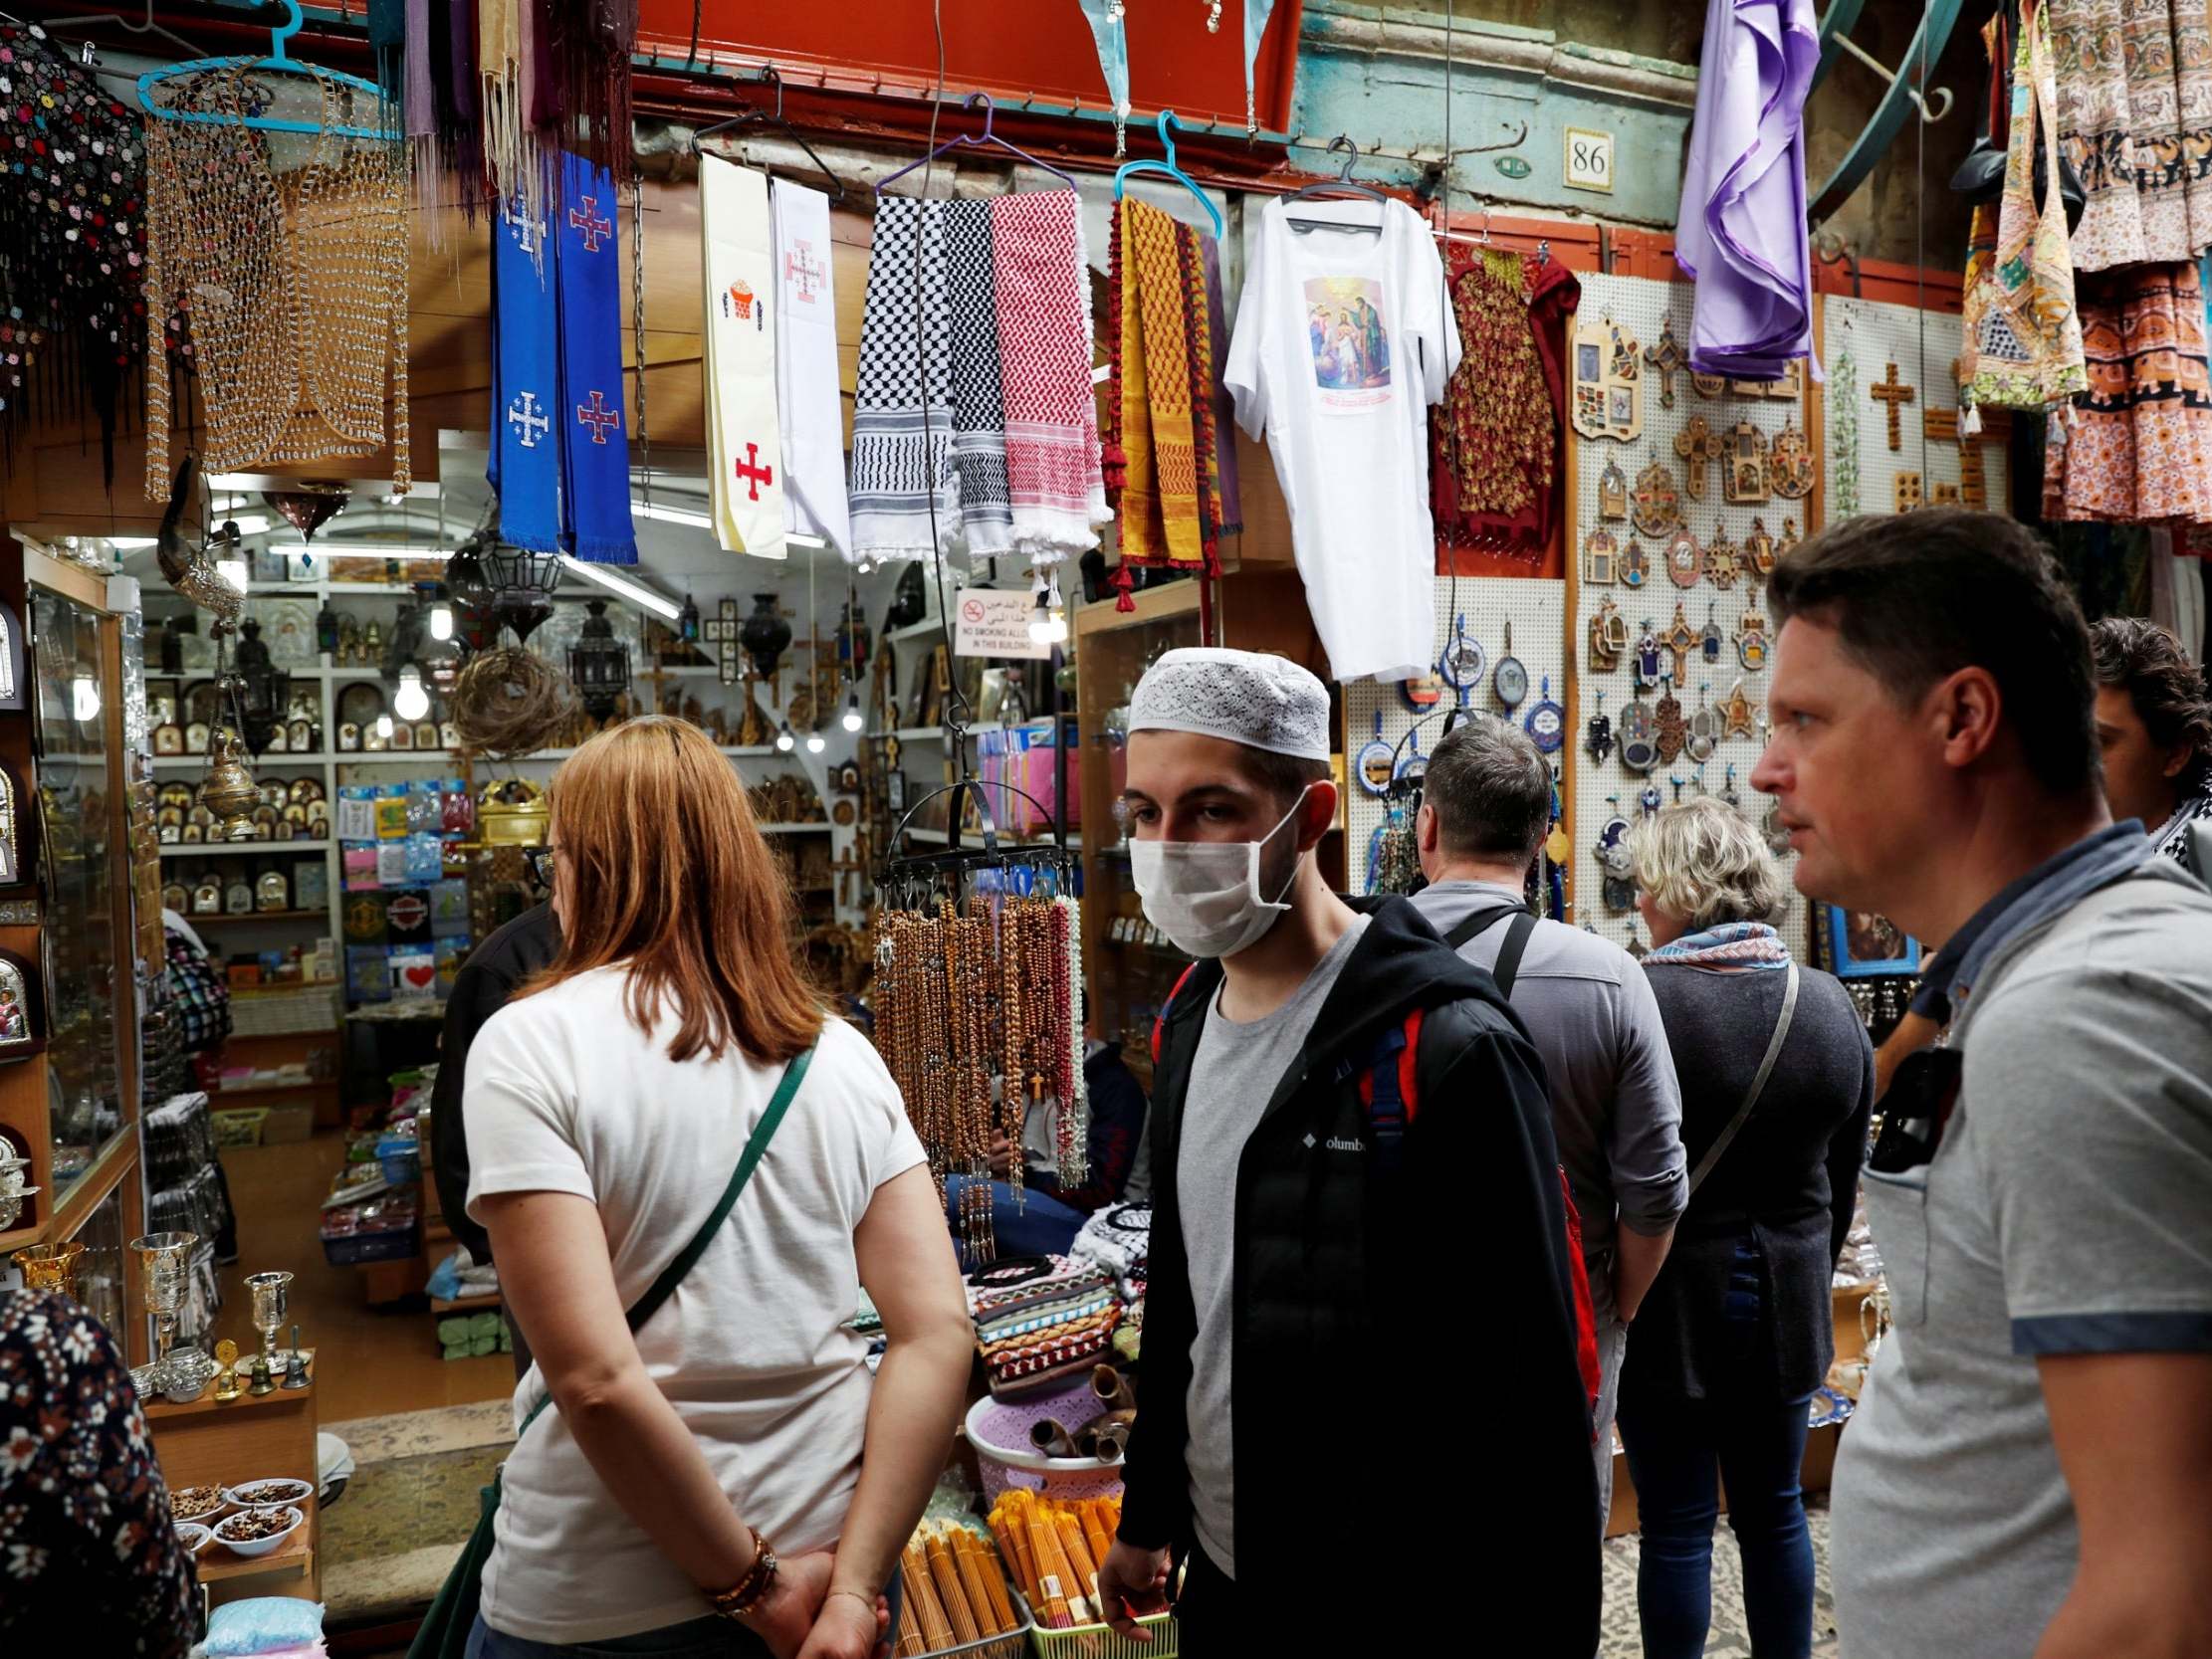 A man wears a face mask for protection as he walks in Jerusalem's Old City